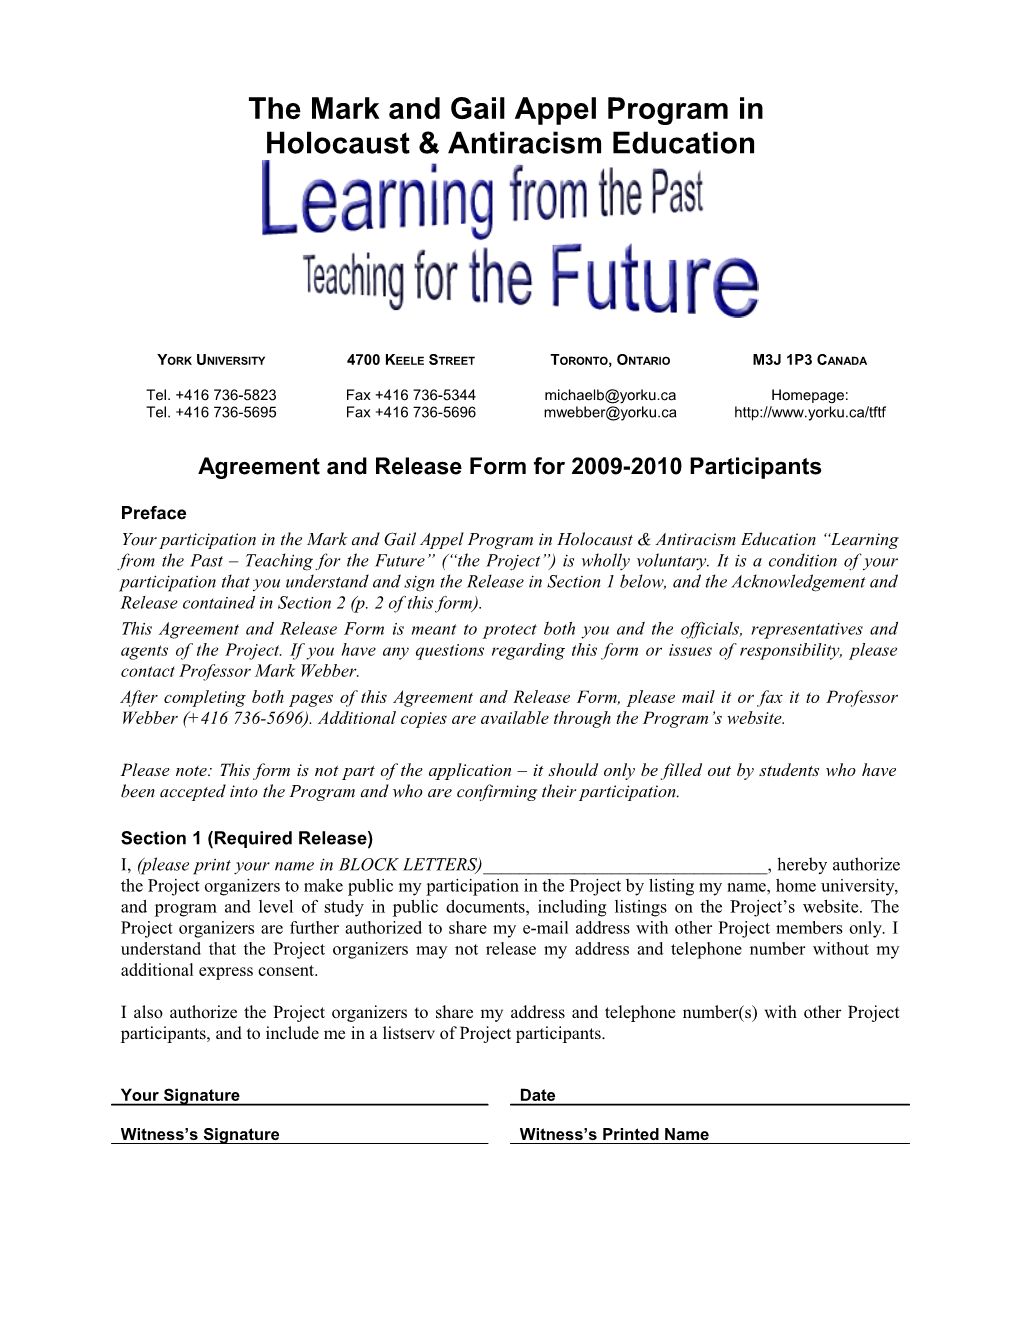 Agreement and Release Form for 2009-2010 Participants